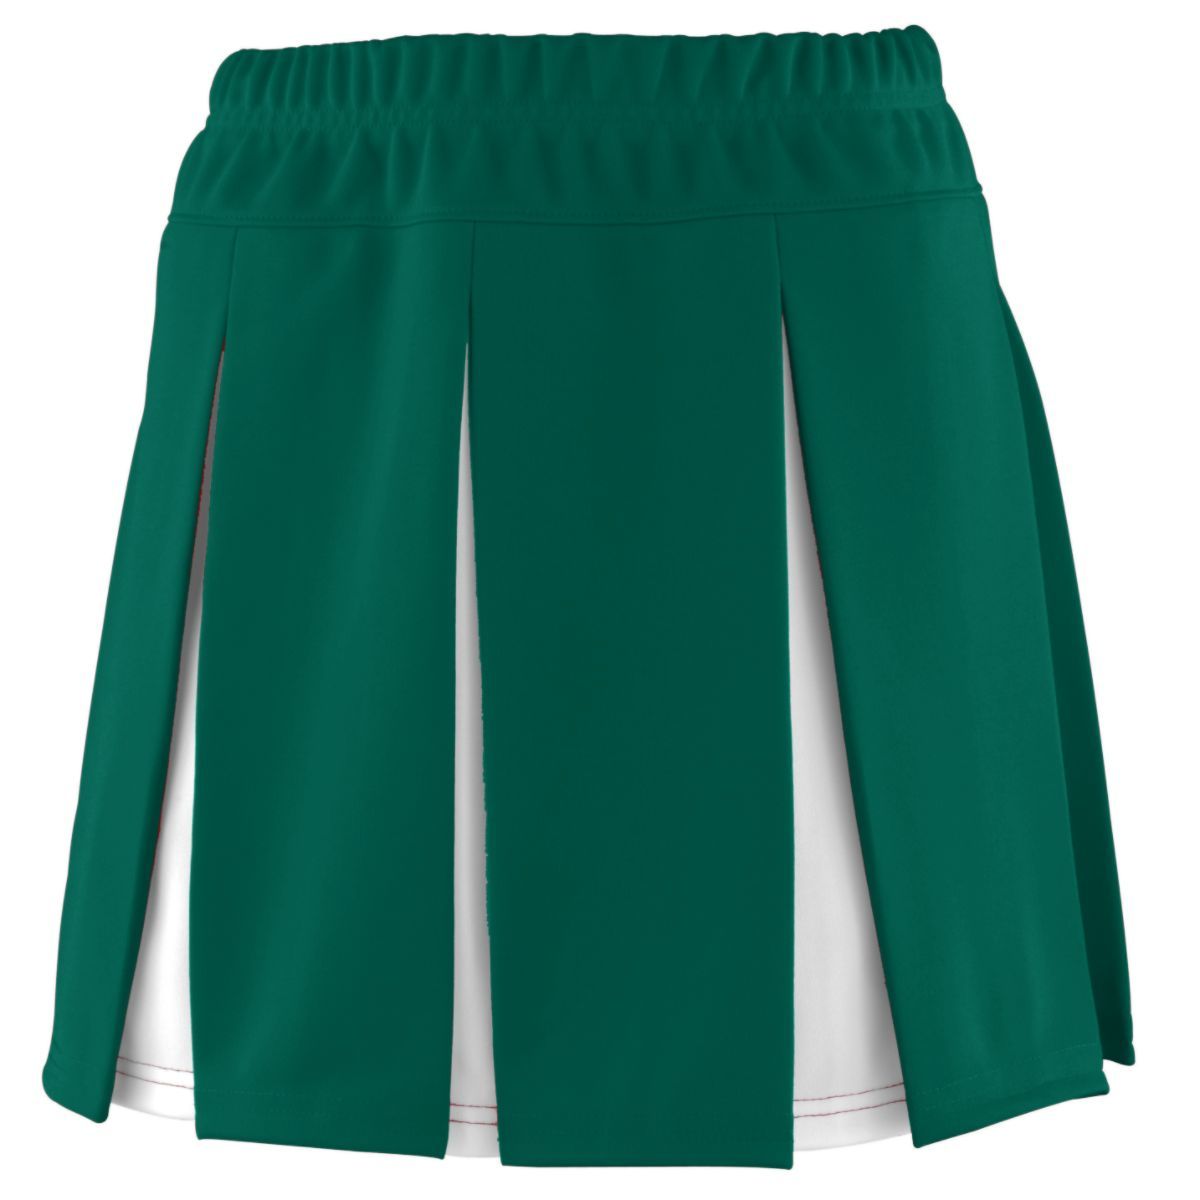 Augusta Sportswear Ladies Liberty Skirt in Dark Green/White  -Part of the Ladies, Augusta-Products, Cheer product lines at KanaleyCreations.com